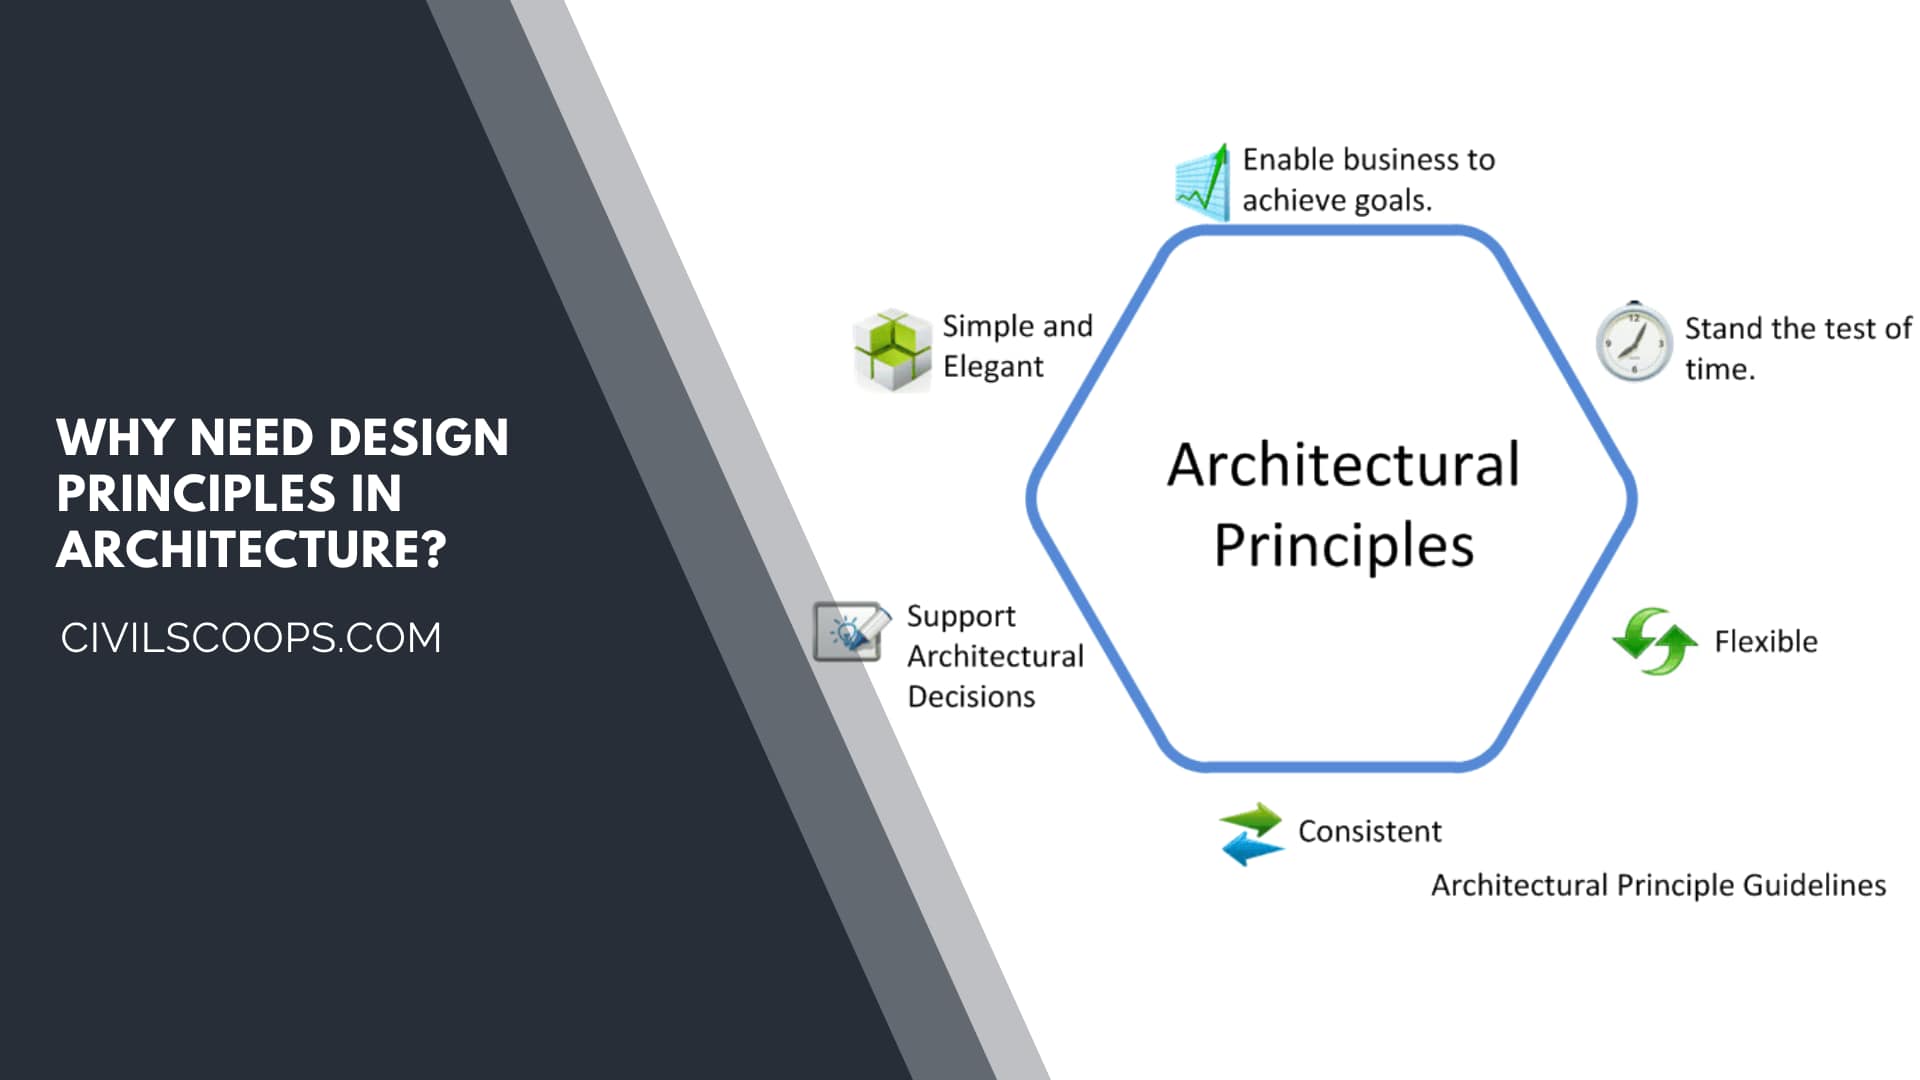 Why Need Design Principles in Architecture?